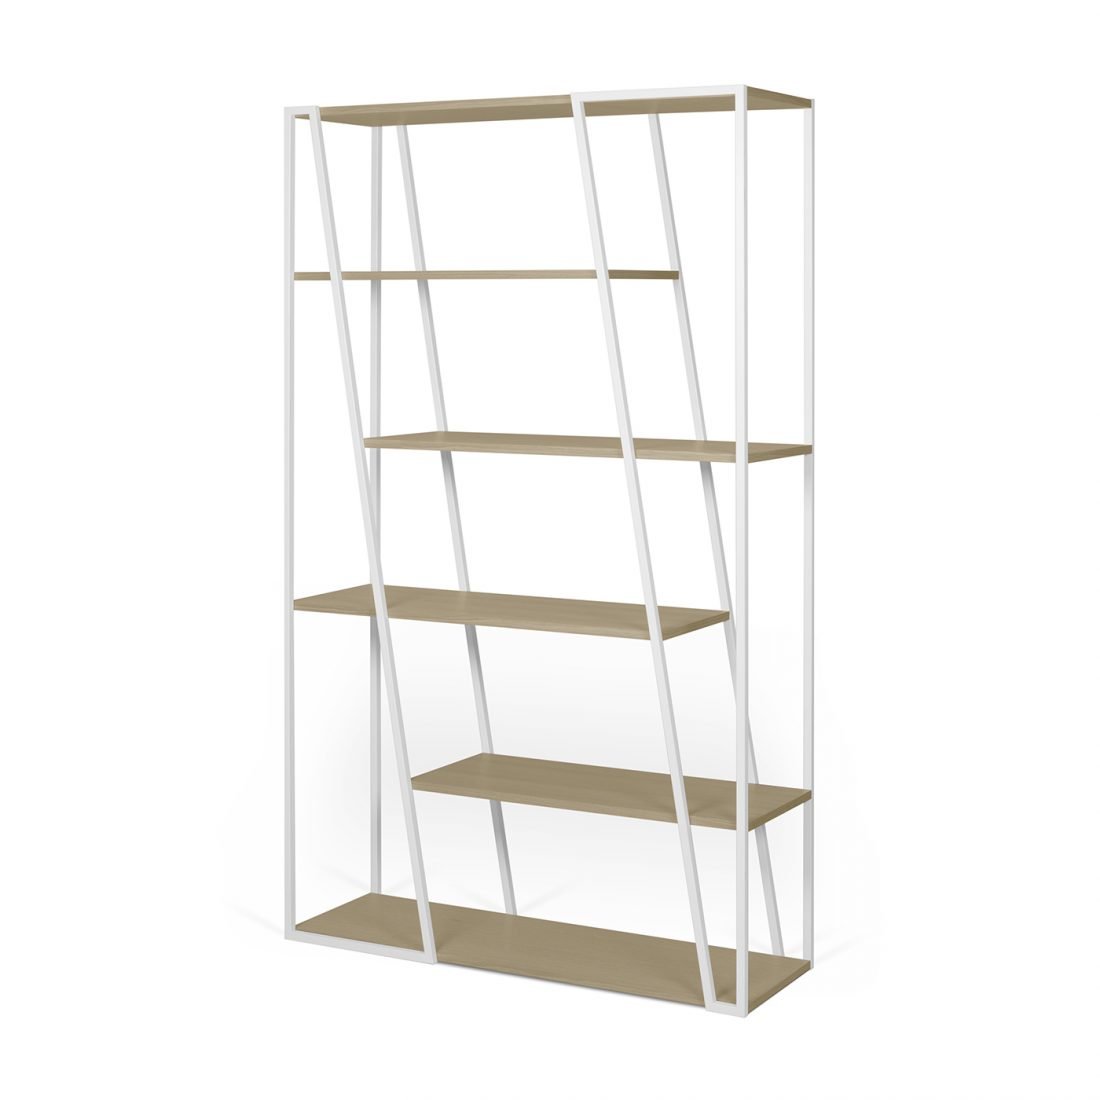 Albi Bookcase from Tema Home, designed by Tiago Sitima